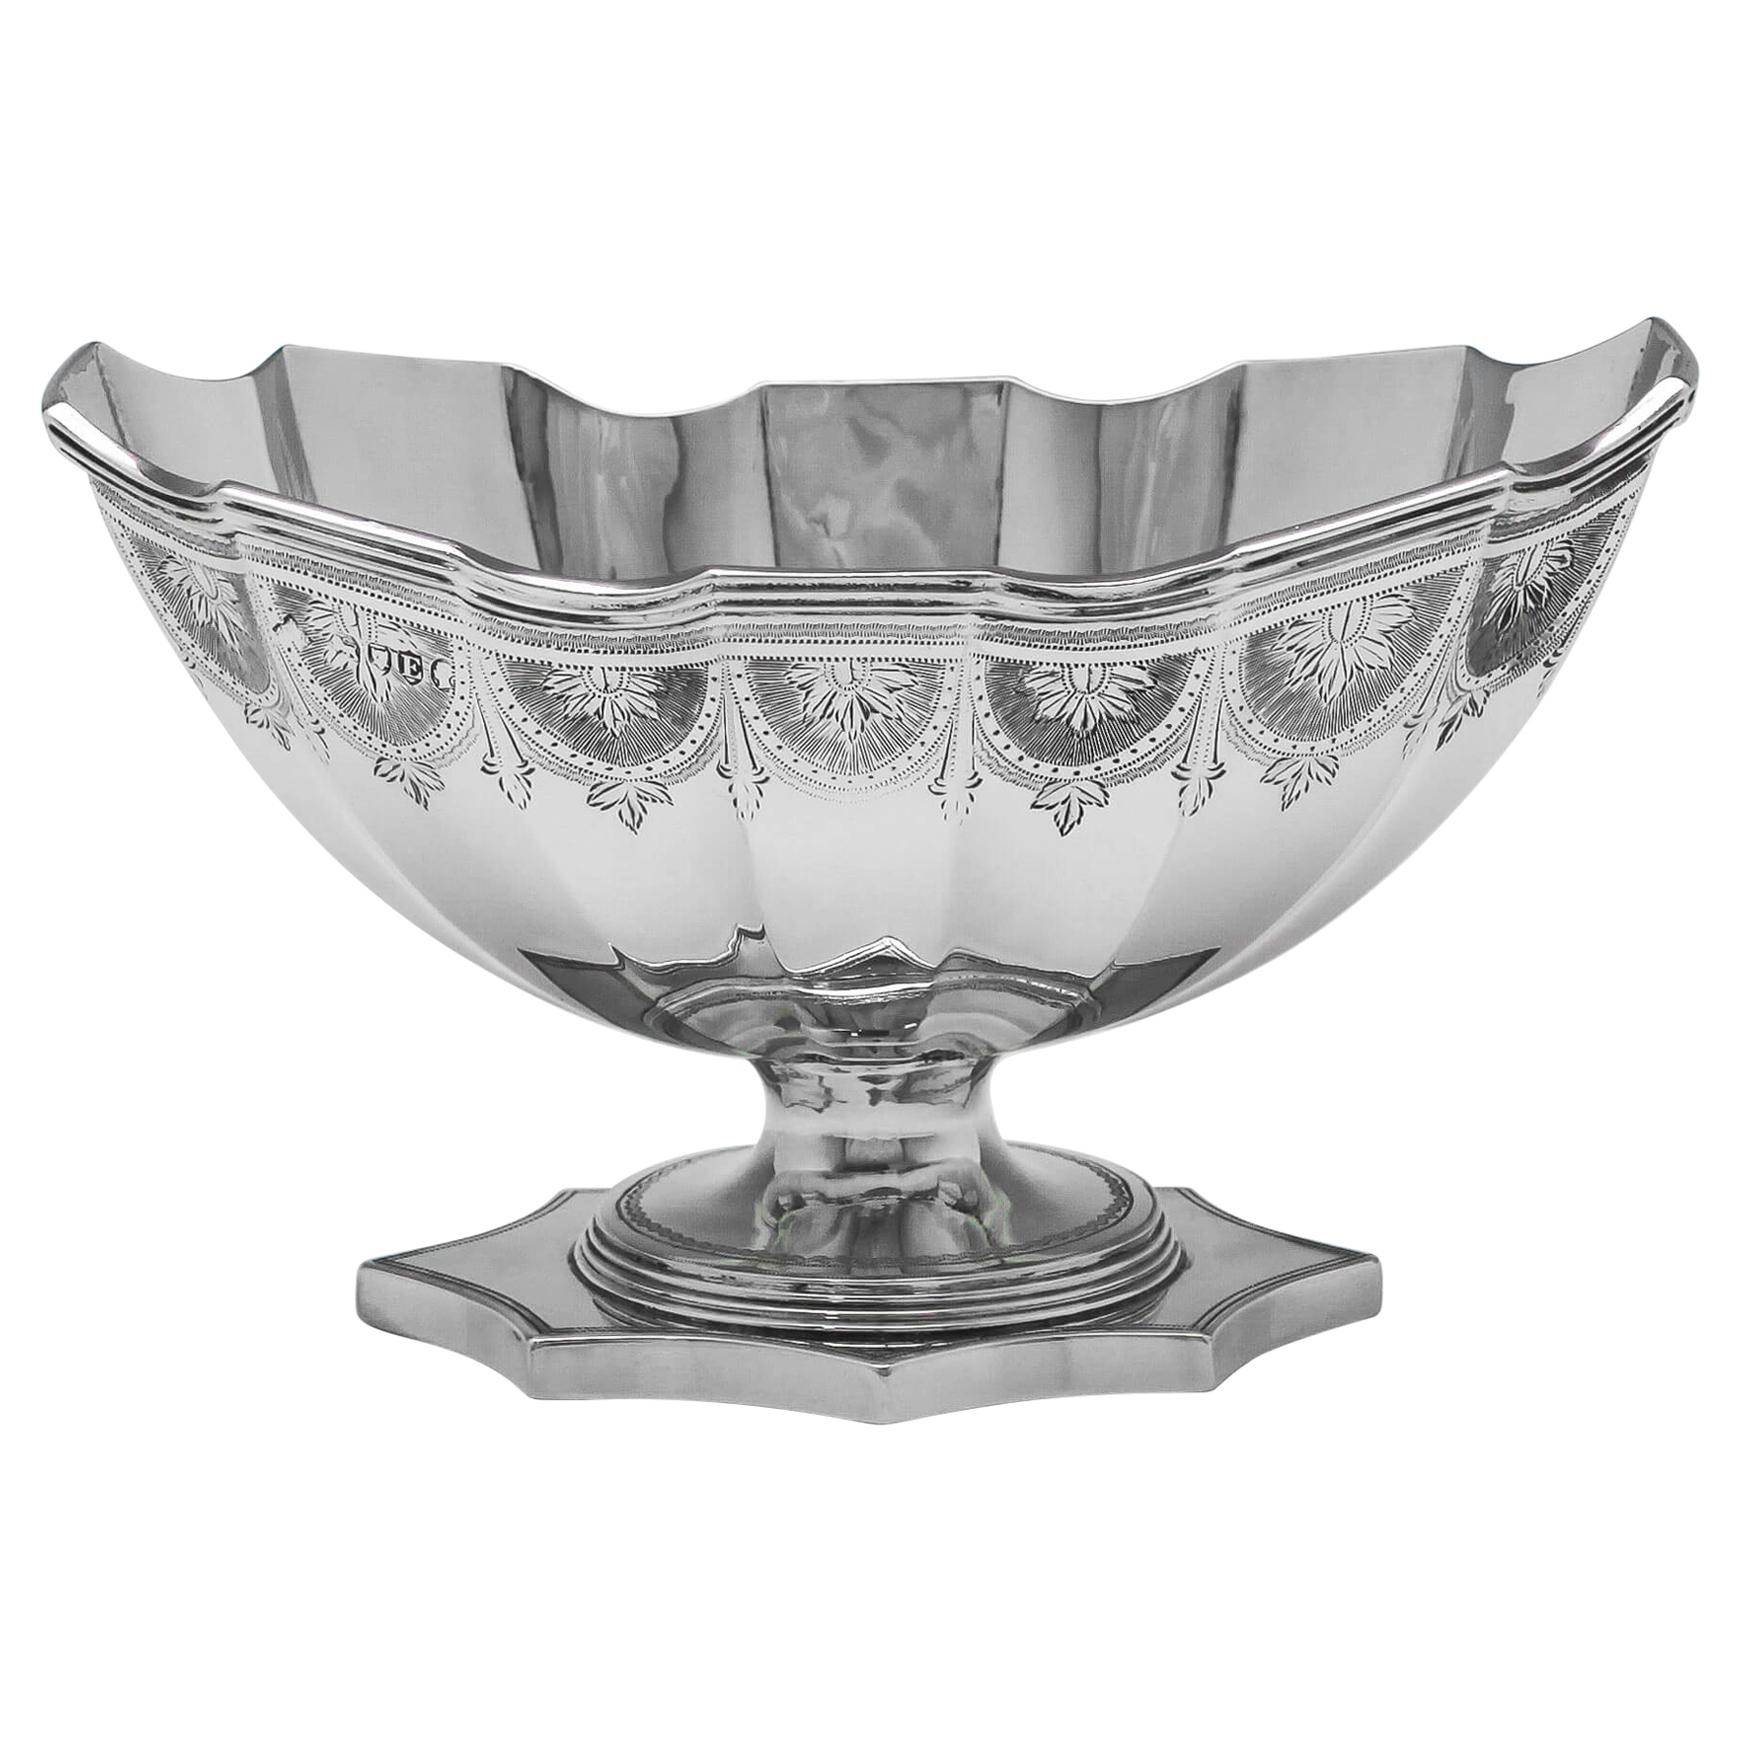 19th Century Victorian Engraved Sterling Silver Bowl by Savoury & Sons